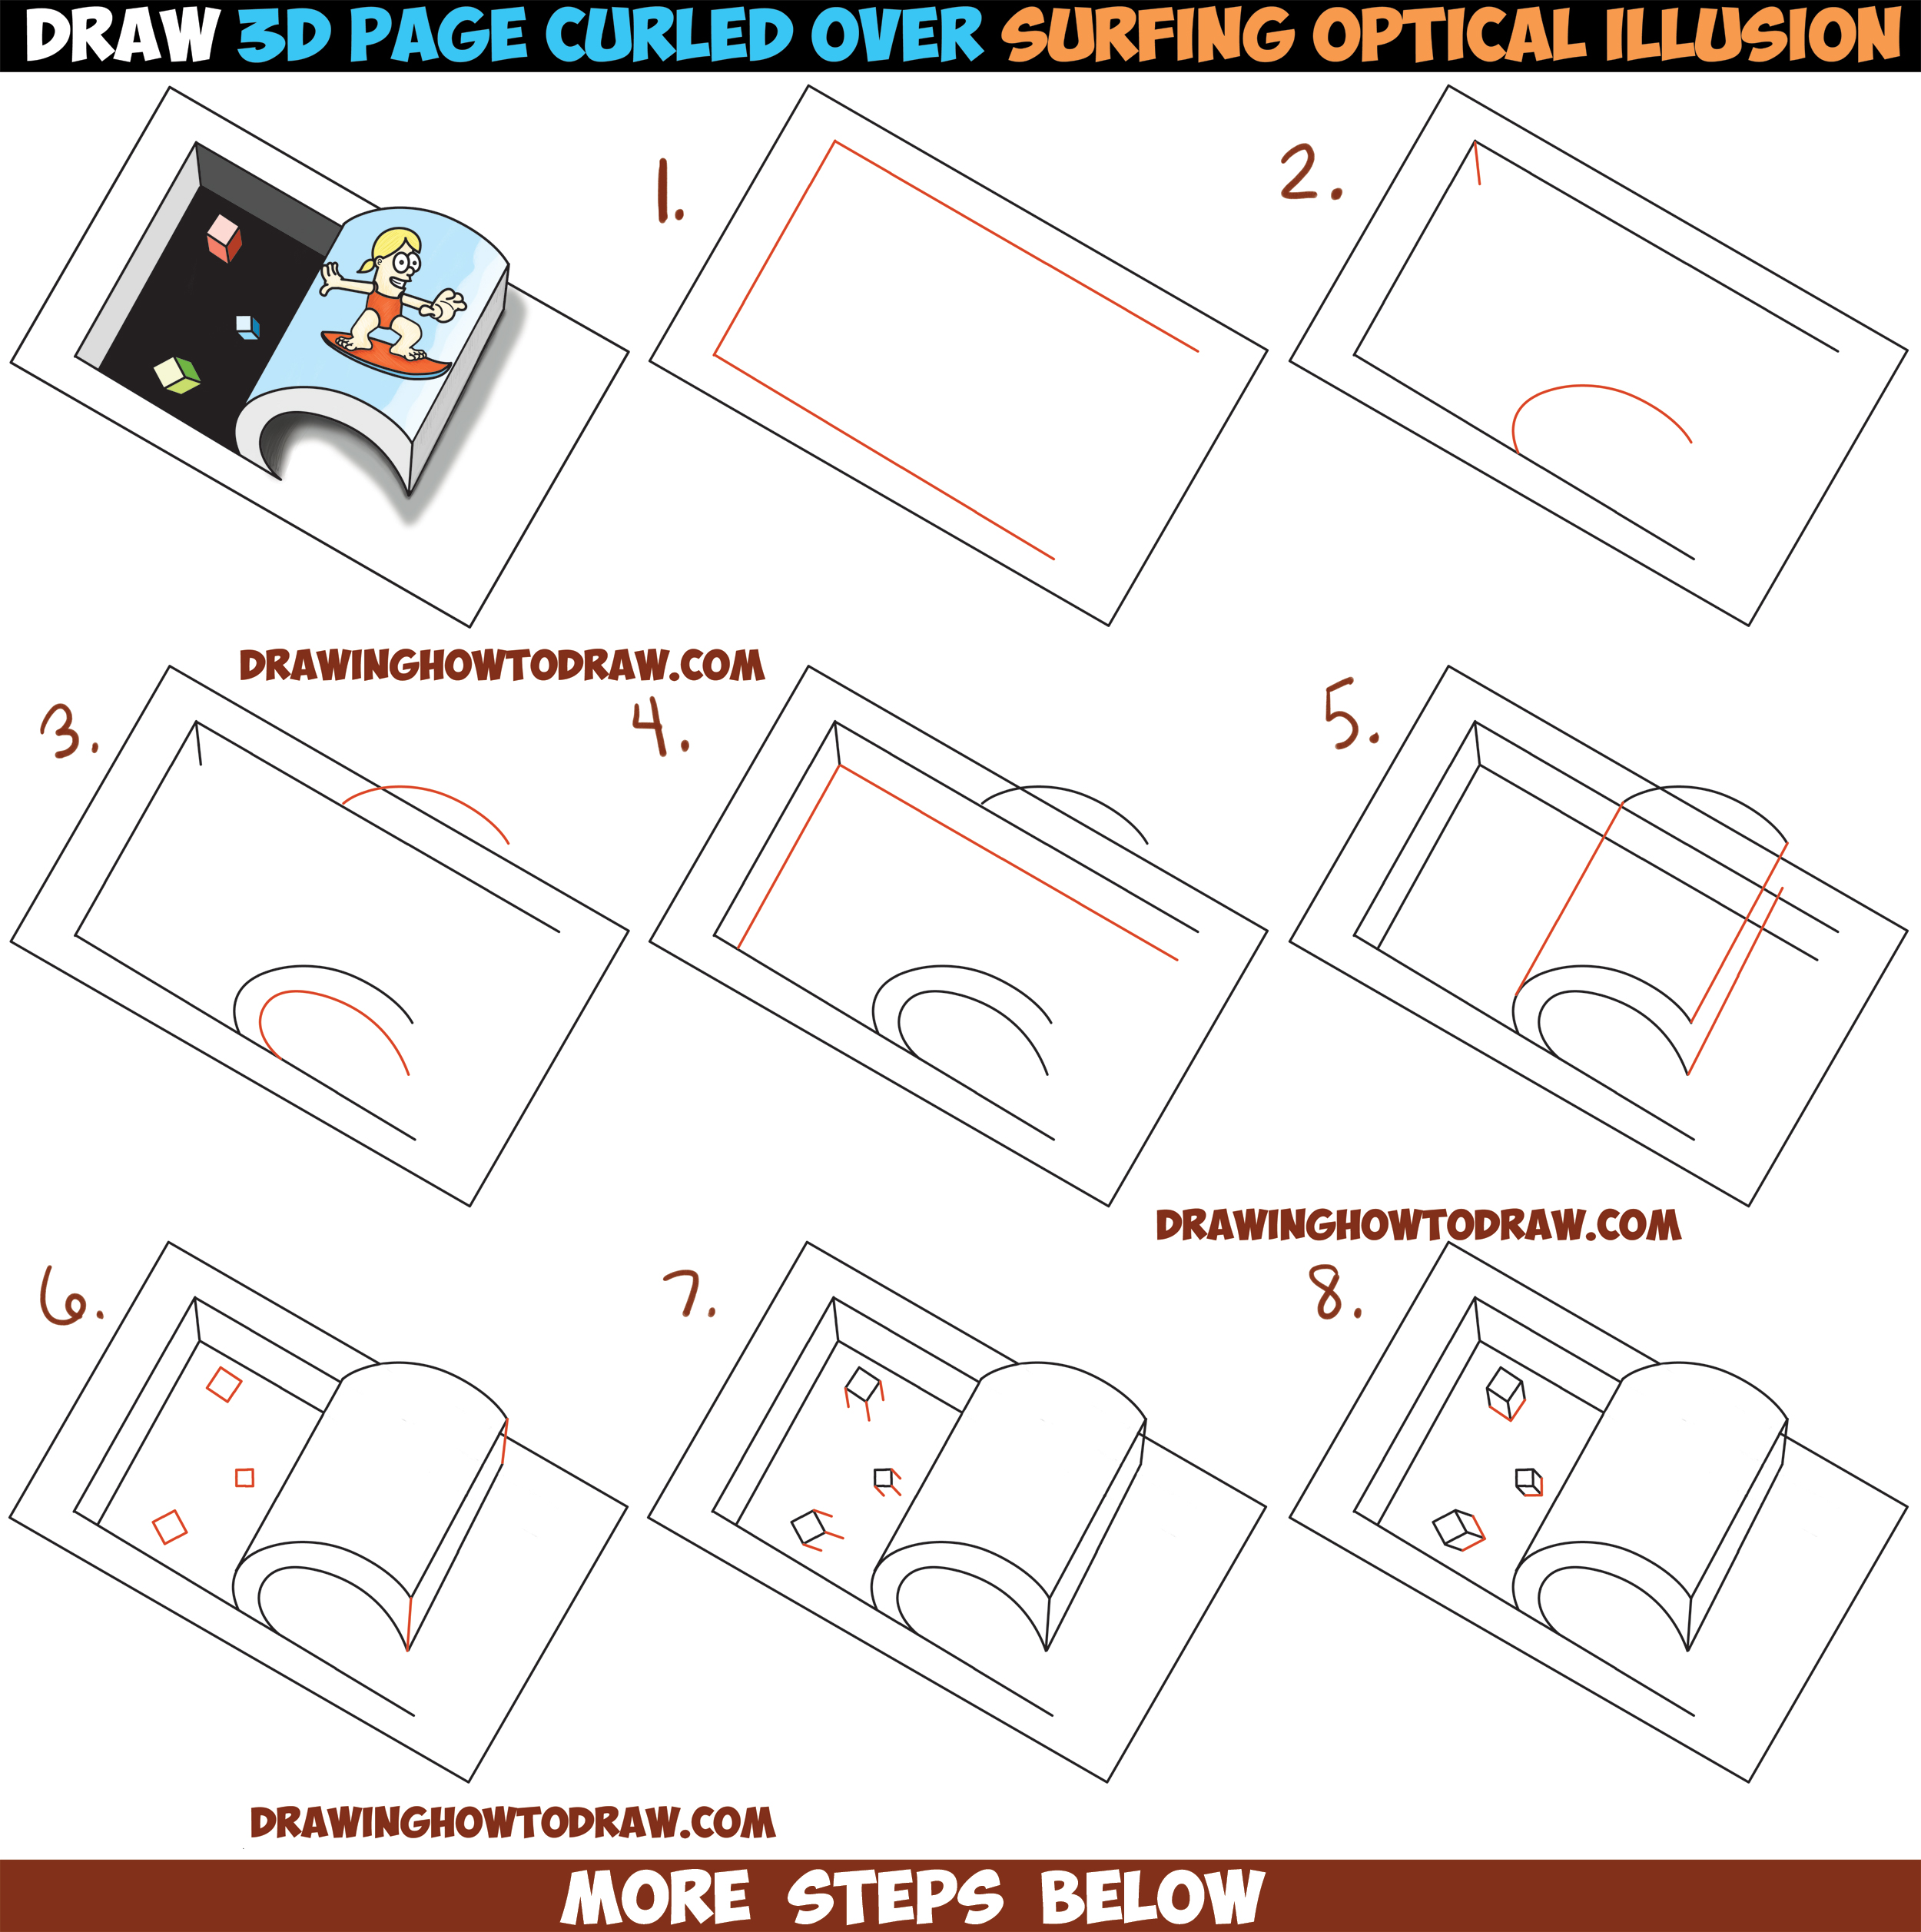 How to draw an optical illusion cube - B+C Guides